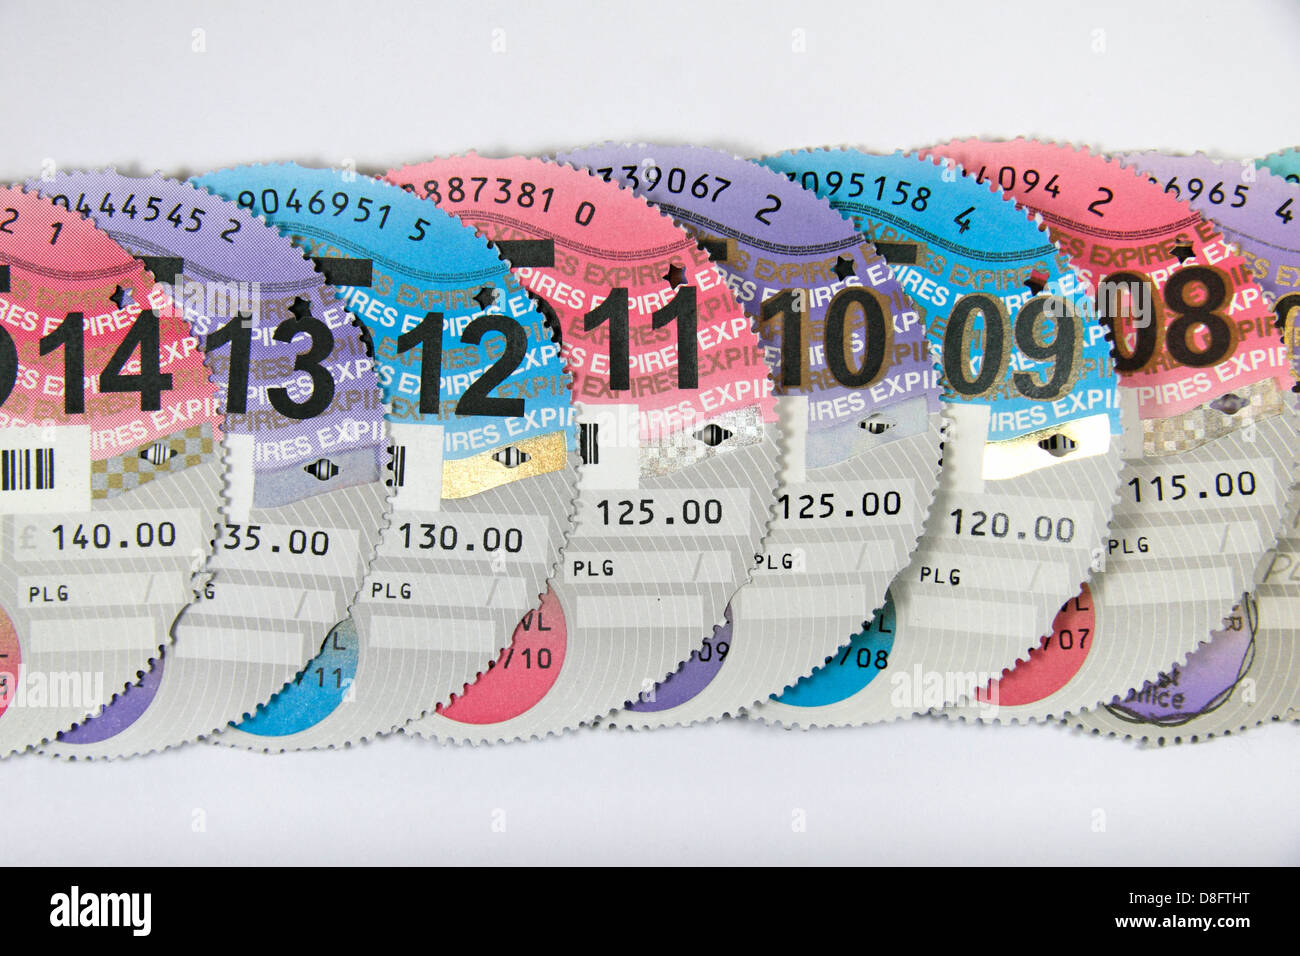 A line of UK tax discs (UK car) showing the steady increase in price from £115 in 2007-8 to £140 in 2013-14. Stock Photo